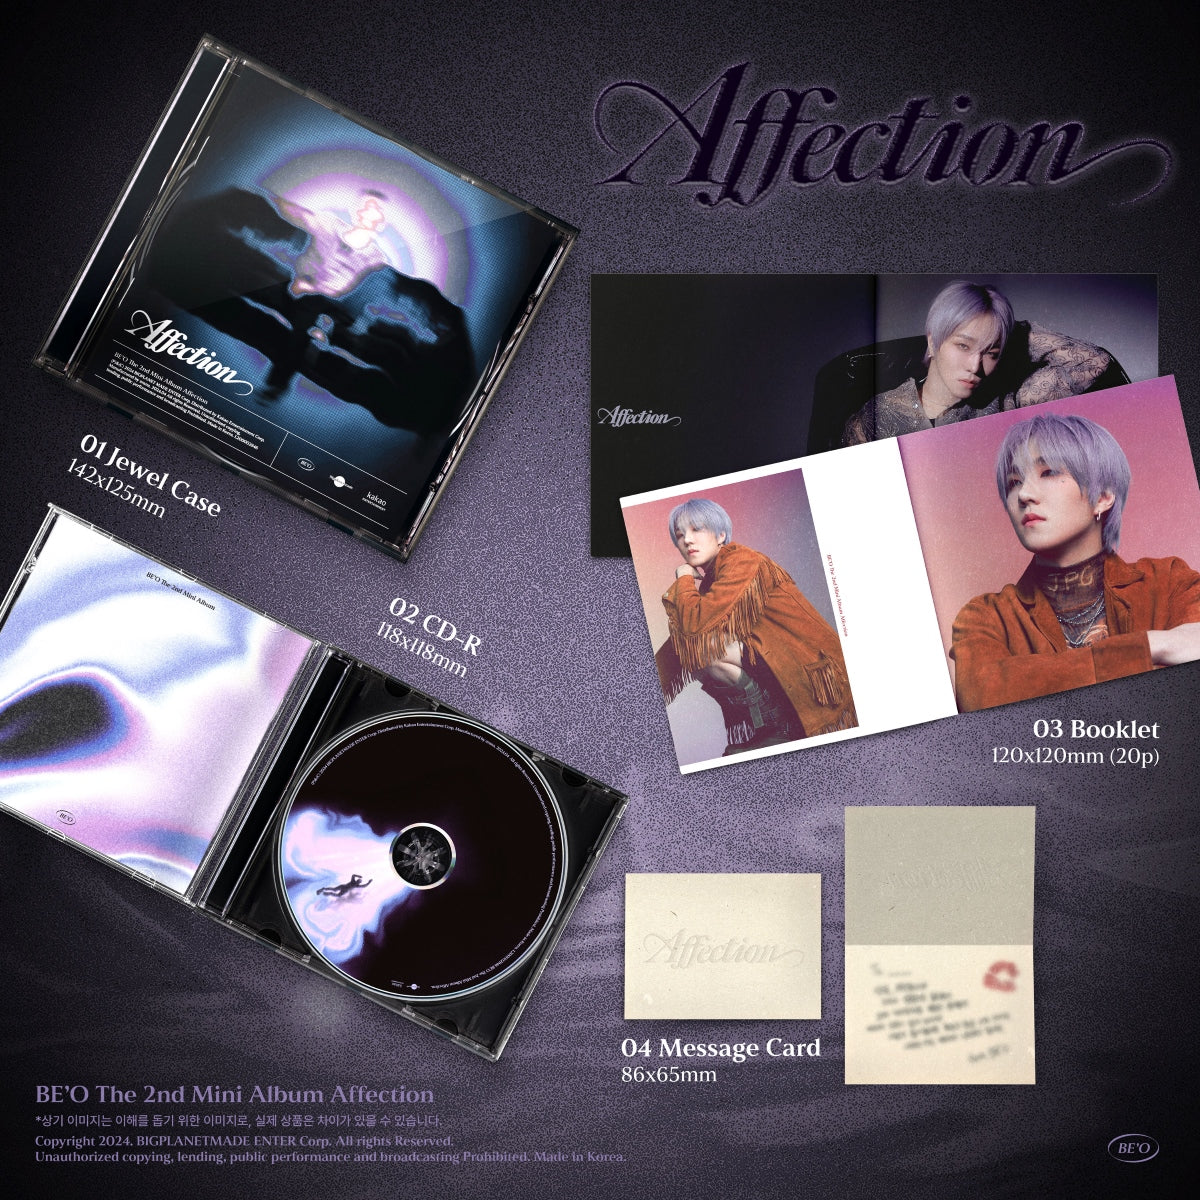 BE'O 2nd Mini Album Affection - Jewel Version Inclusions: Jewel Case, Booklet. CD, Message Card